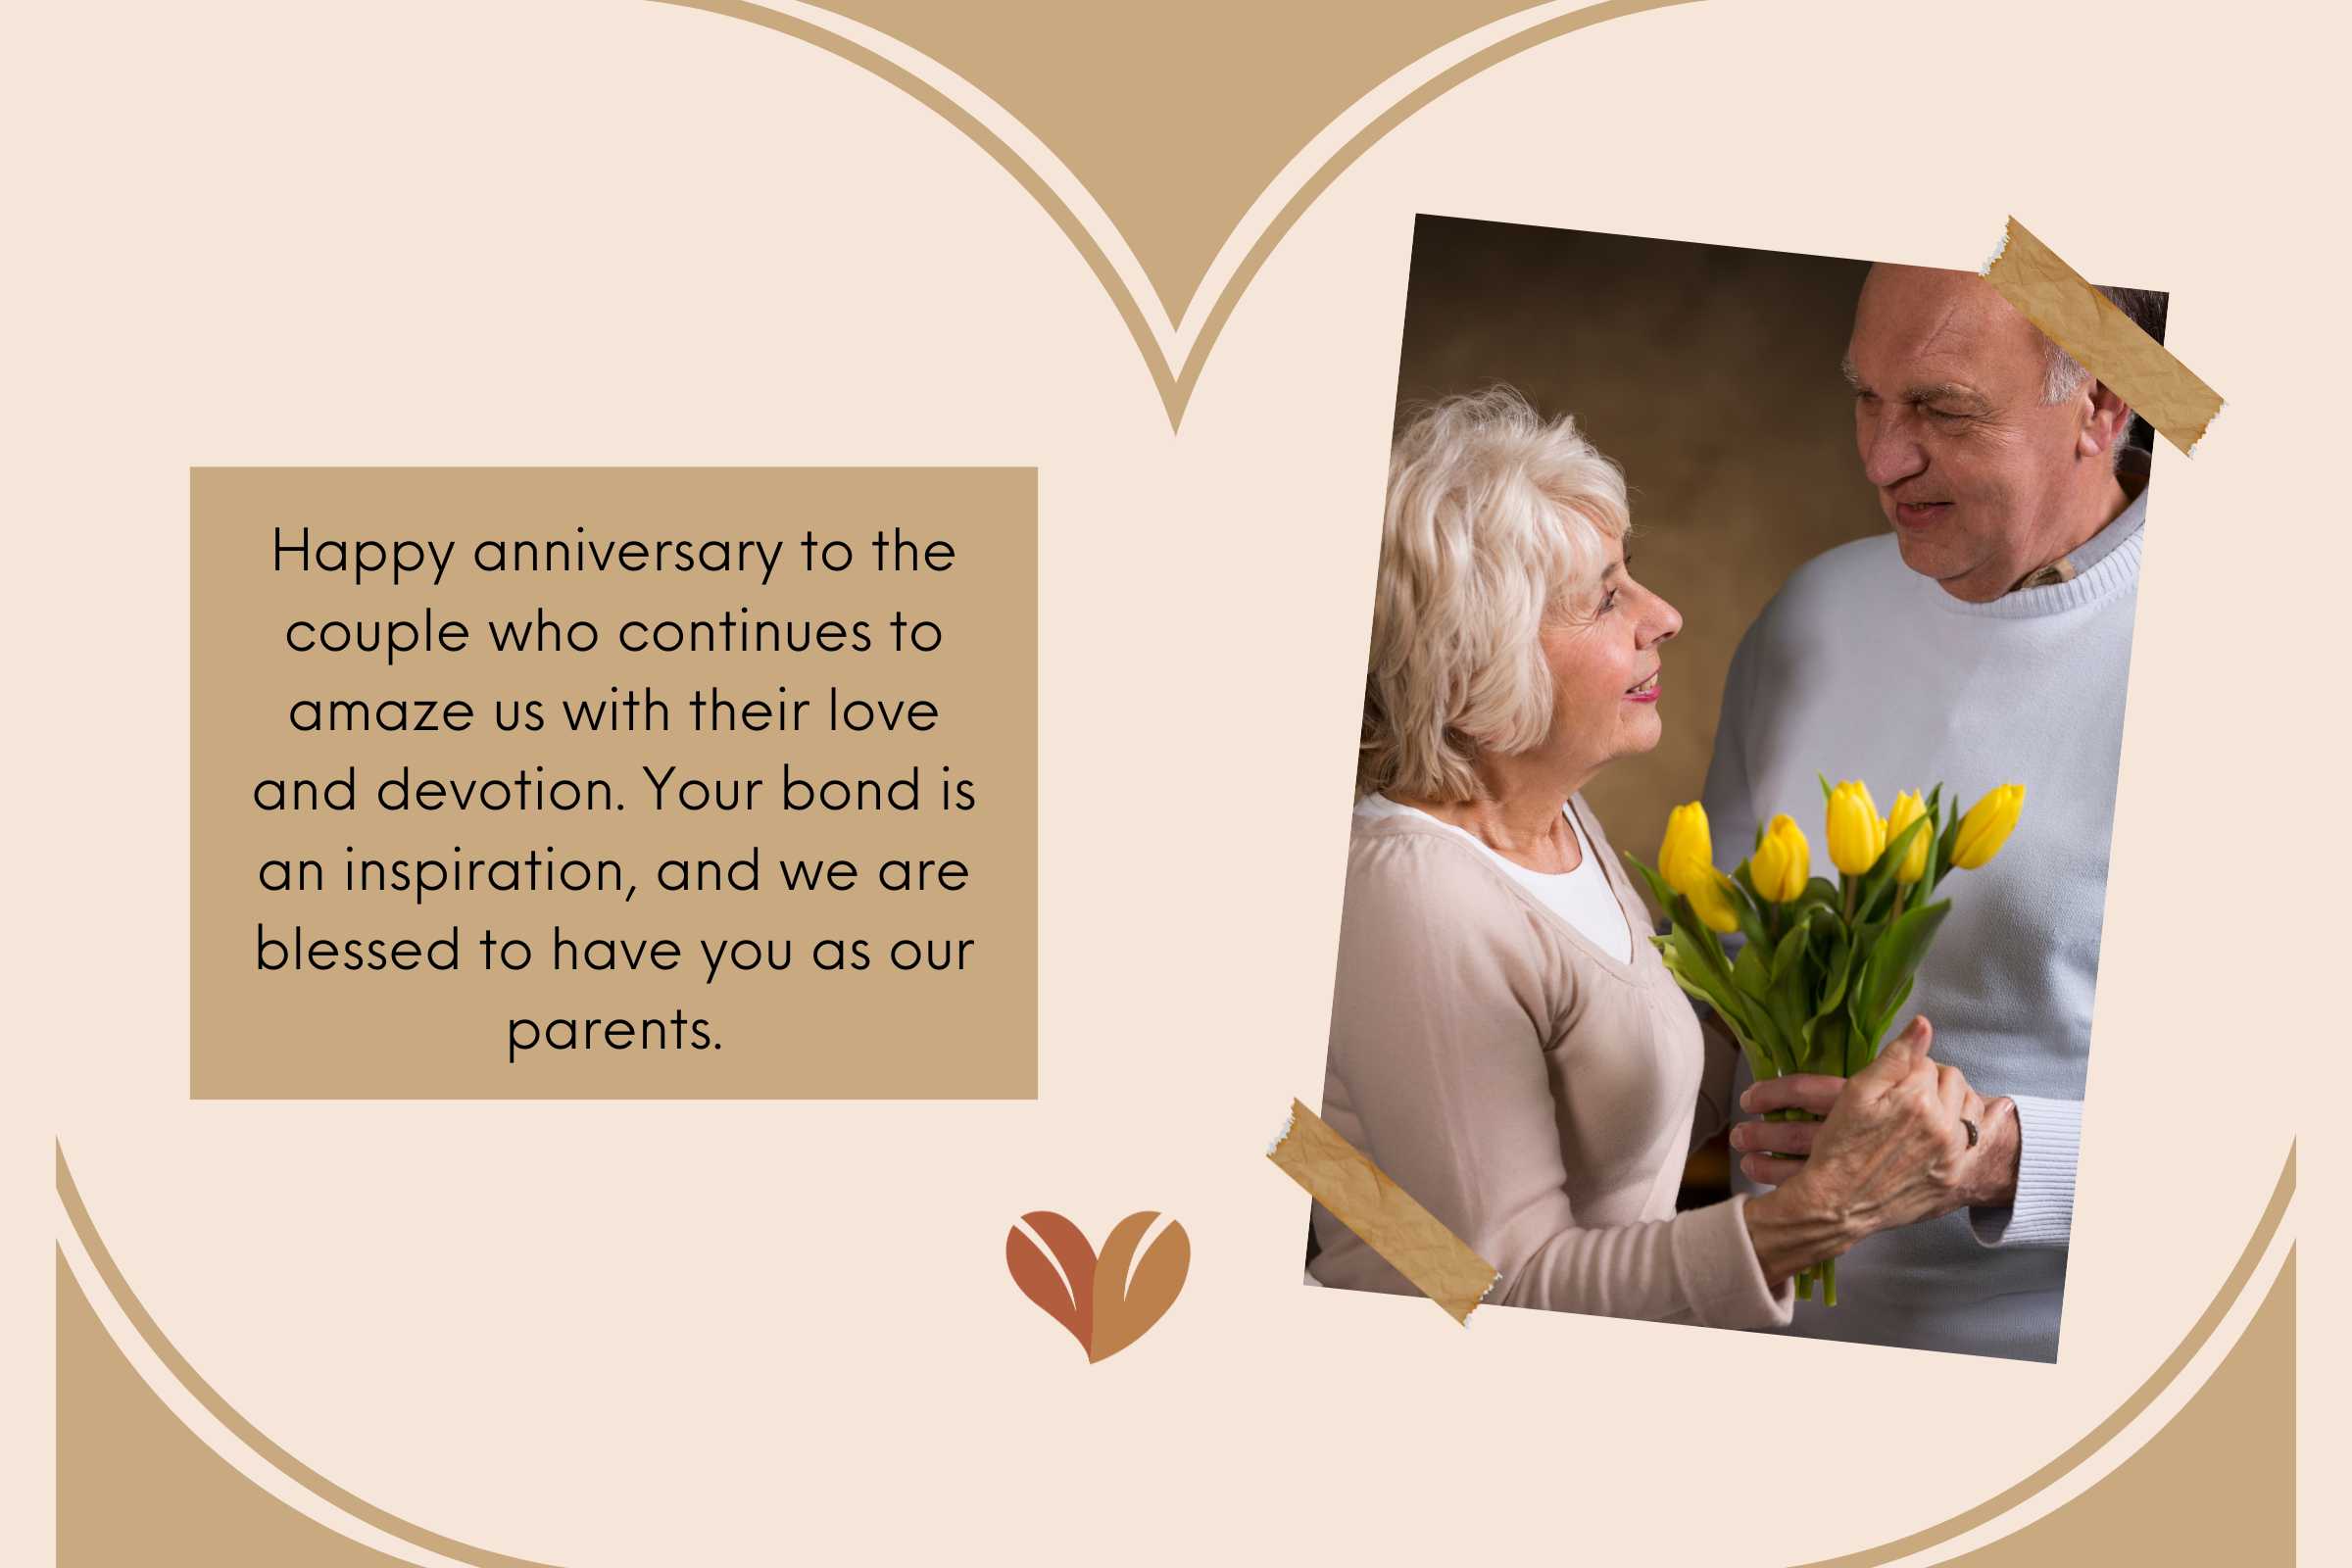 May your love continue to inspire and guide us - Anniversary wishes for parents